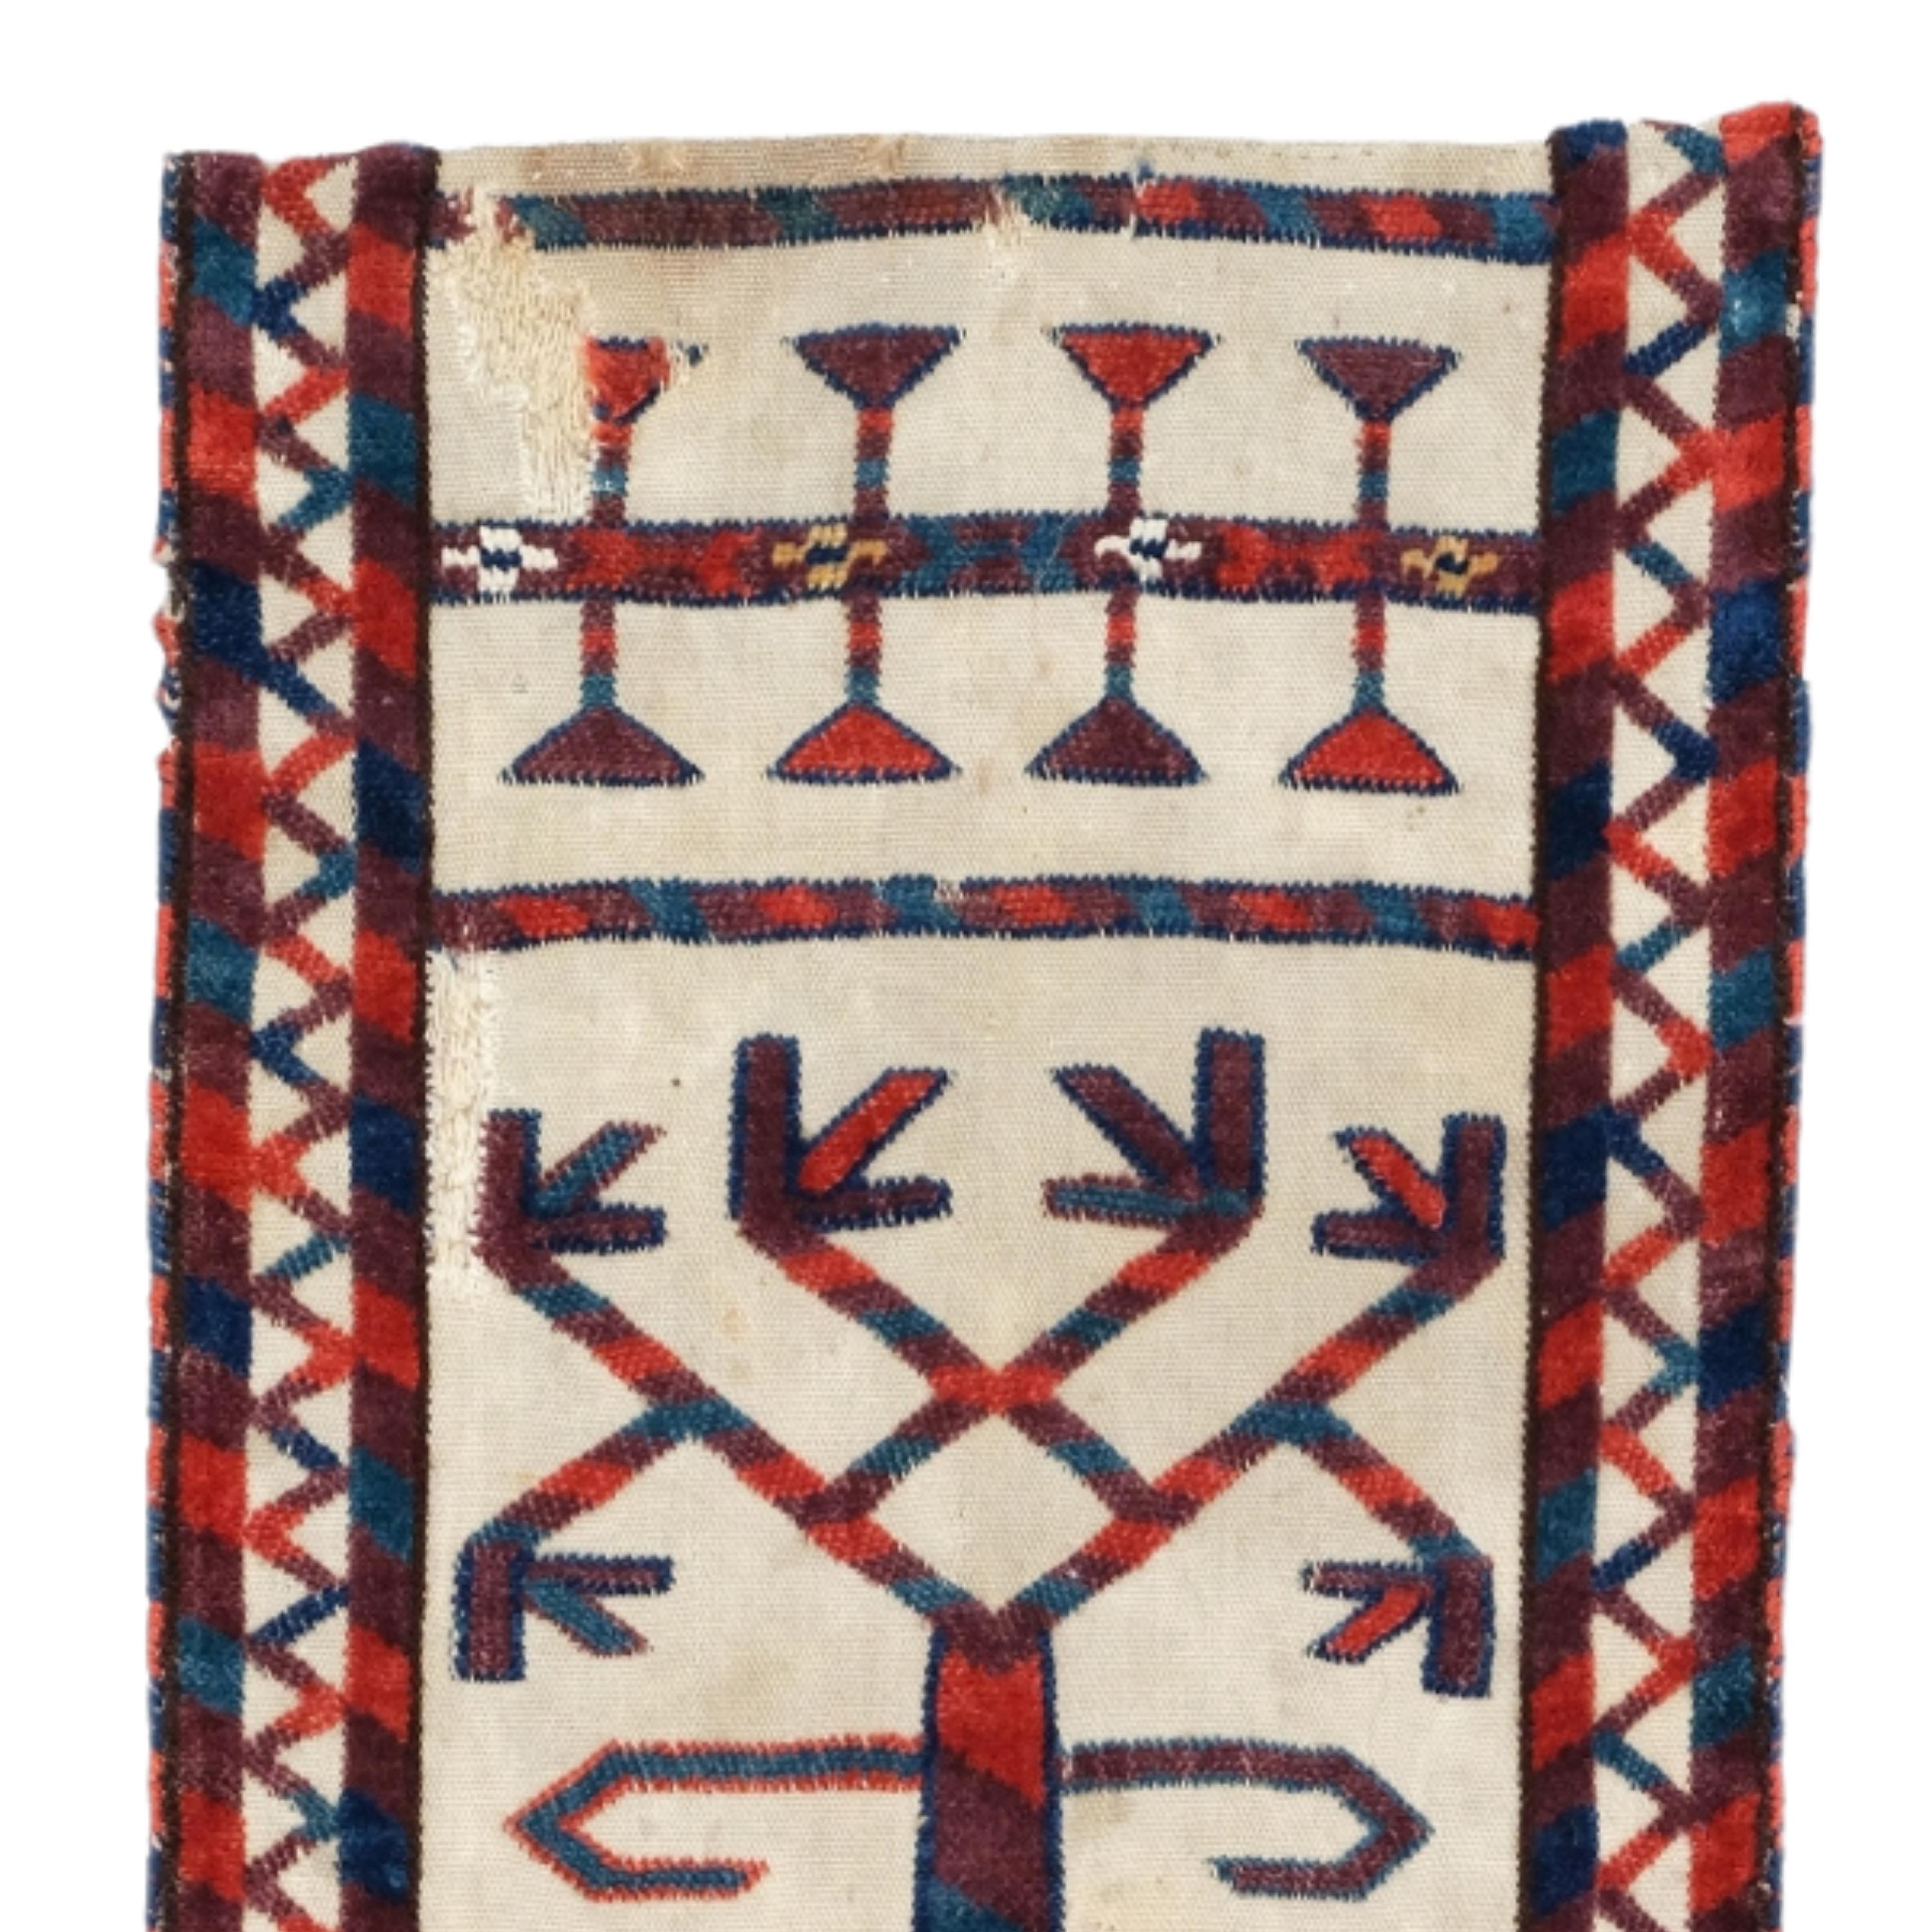 Antique Tentband Fragment  Asian Rug
19th Century Turkmen Tekke Tentband Fragment

The incredibly fine knotting in this Turkmen tent-band fragment was probably made by Teke tribes during the 19th century. Once around  12 metres long, time and wear